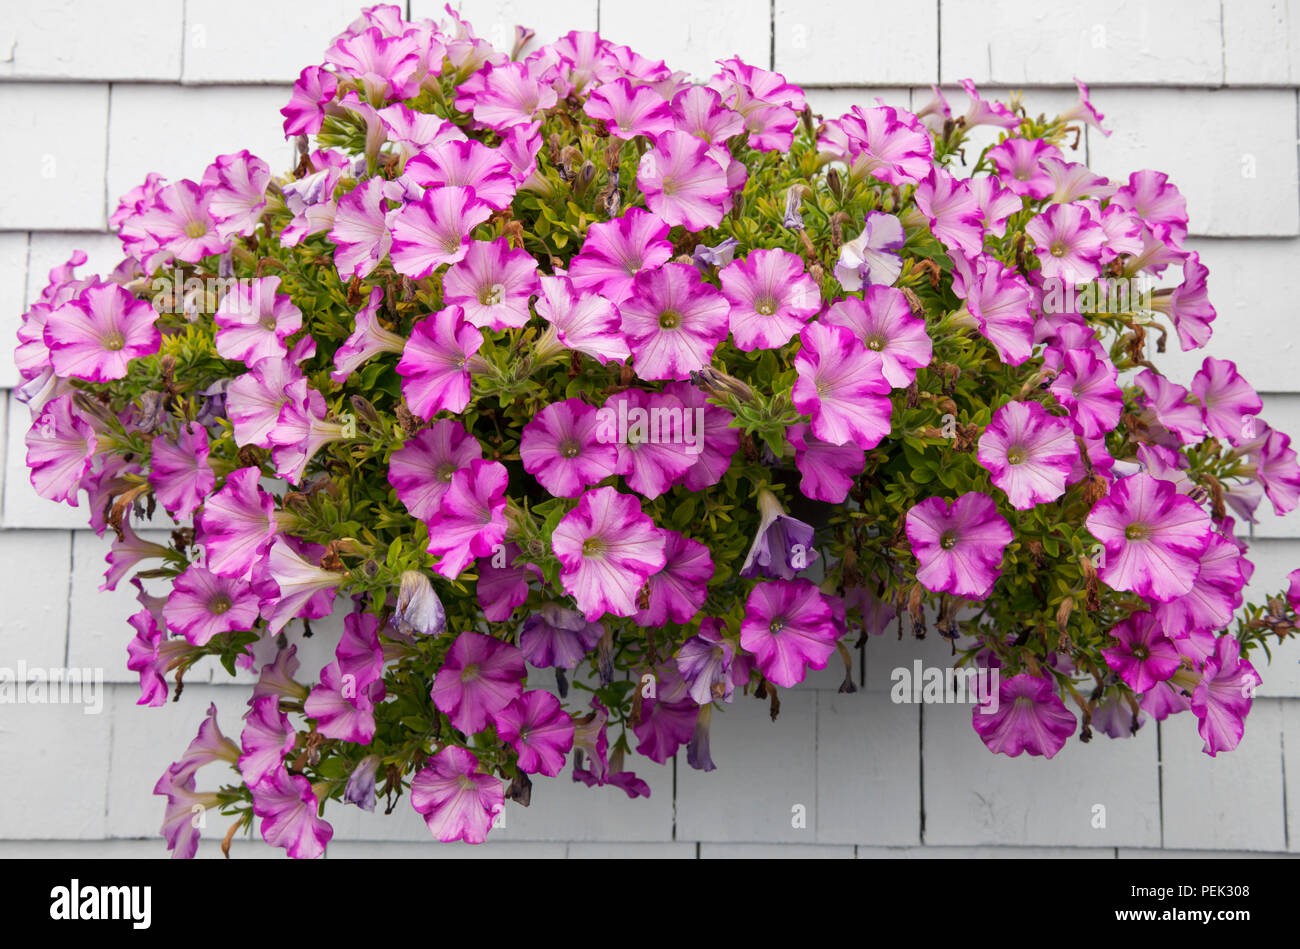 Pink petunia flowers in hanging basket decorating white wall of a house. Bonaventure, Gaspe Peninsula, Quebec, Canada. Stock Photo